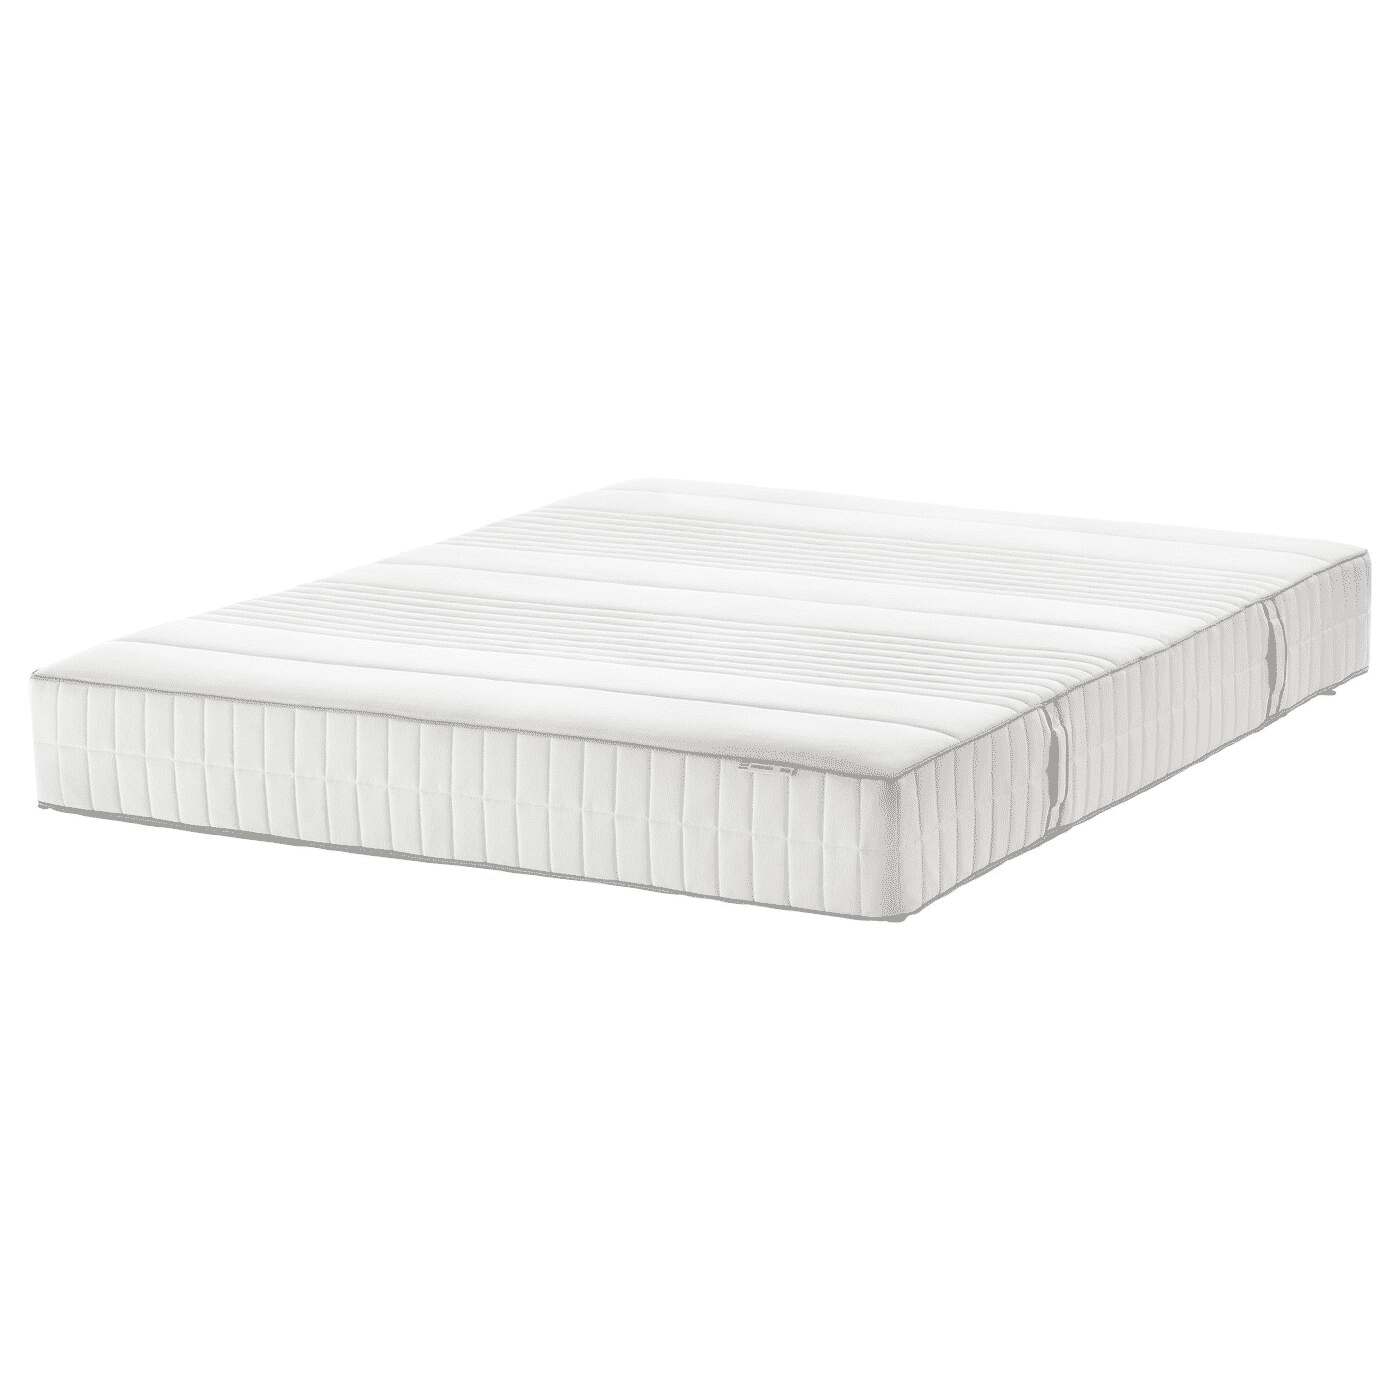 20 best ikea mattresses review 2021 ikea product reviews